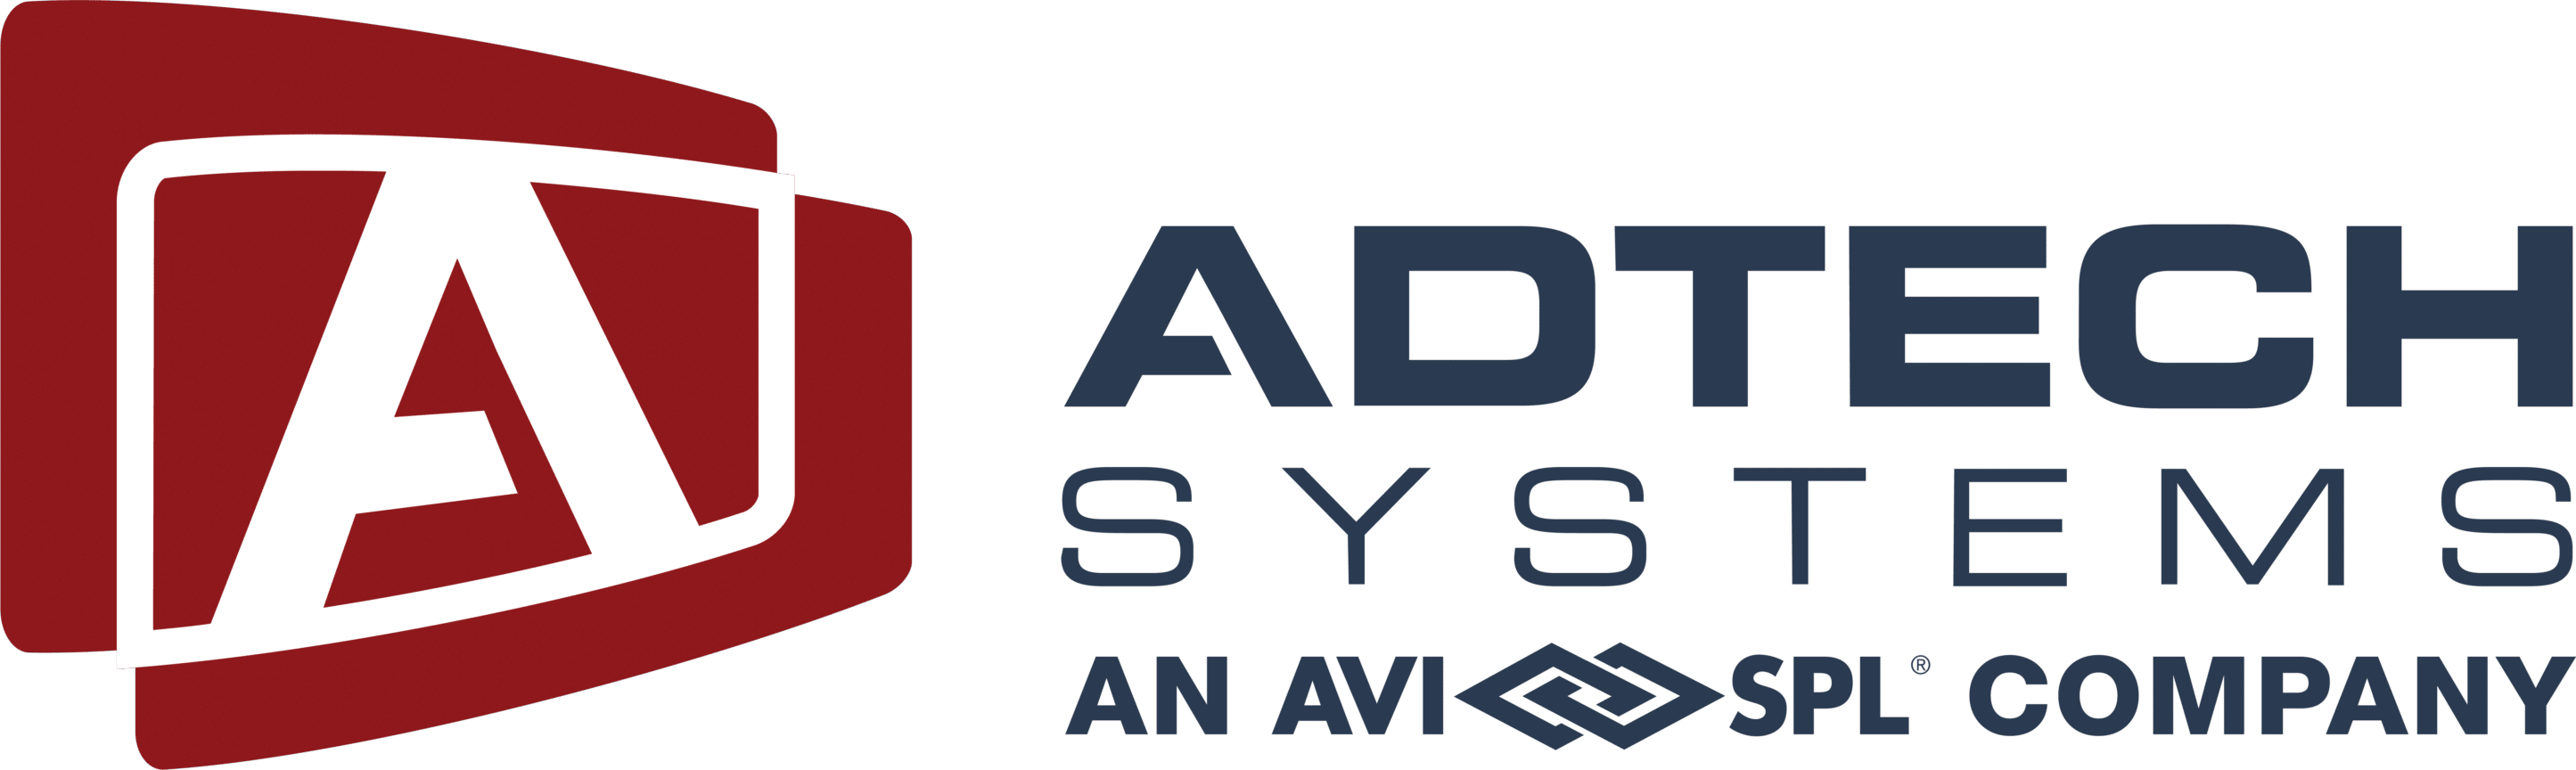 Adtech systems an AVI-SPL company logo with red A